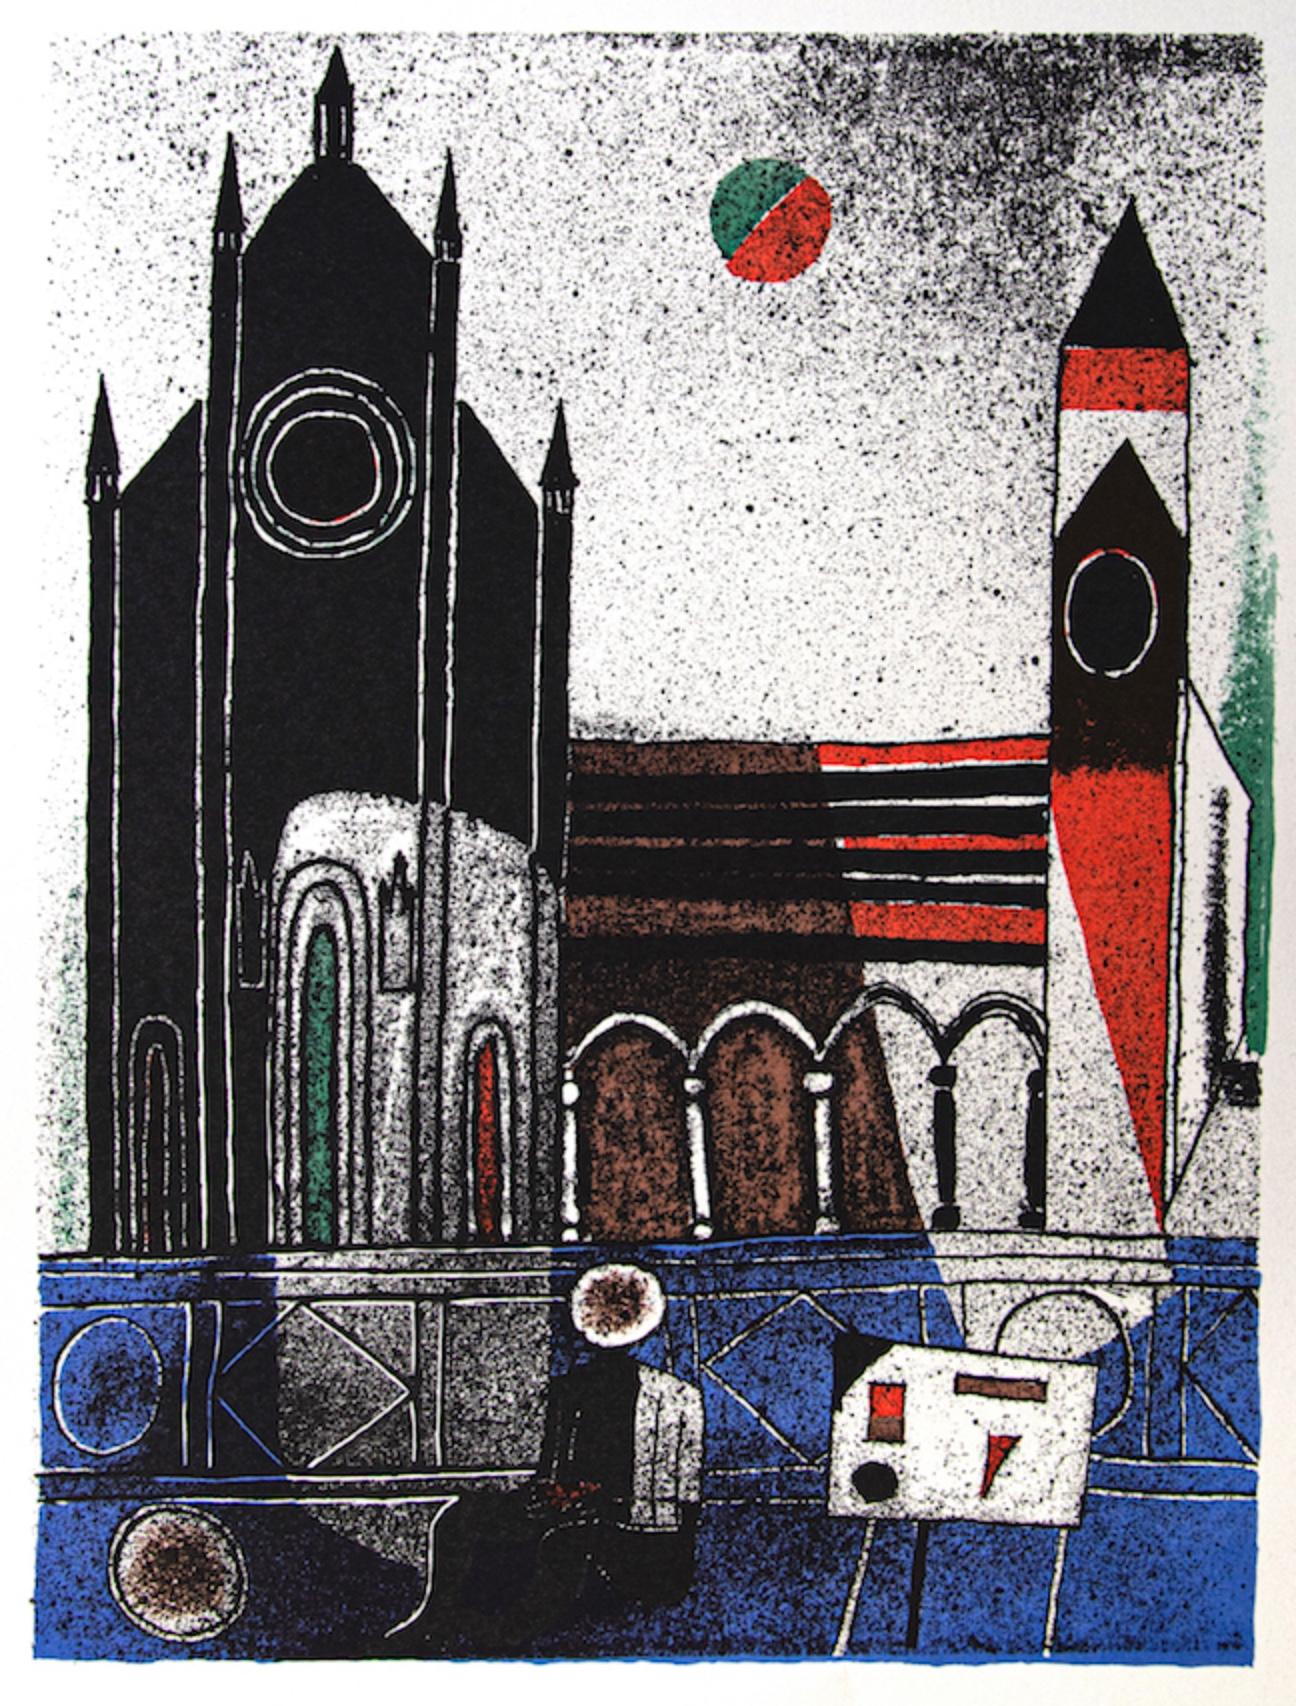 The Cathedral - Offset Print by Franco Gentilini  - 1970s